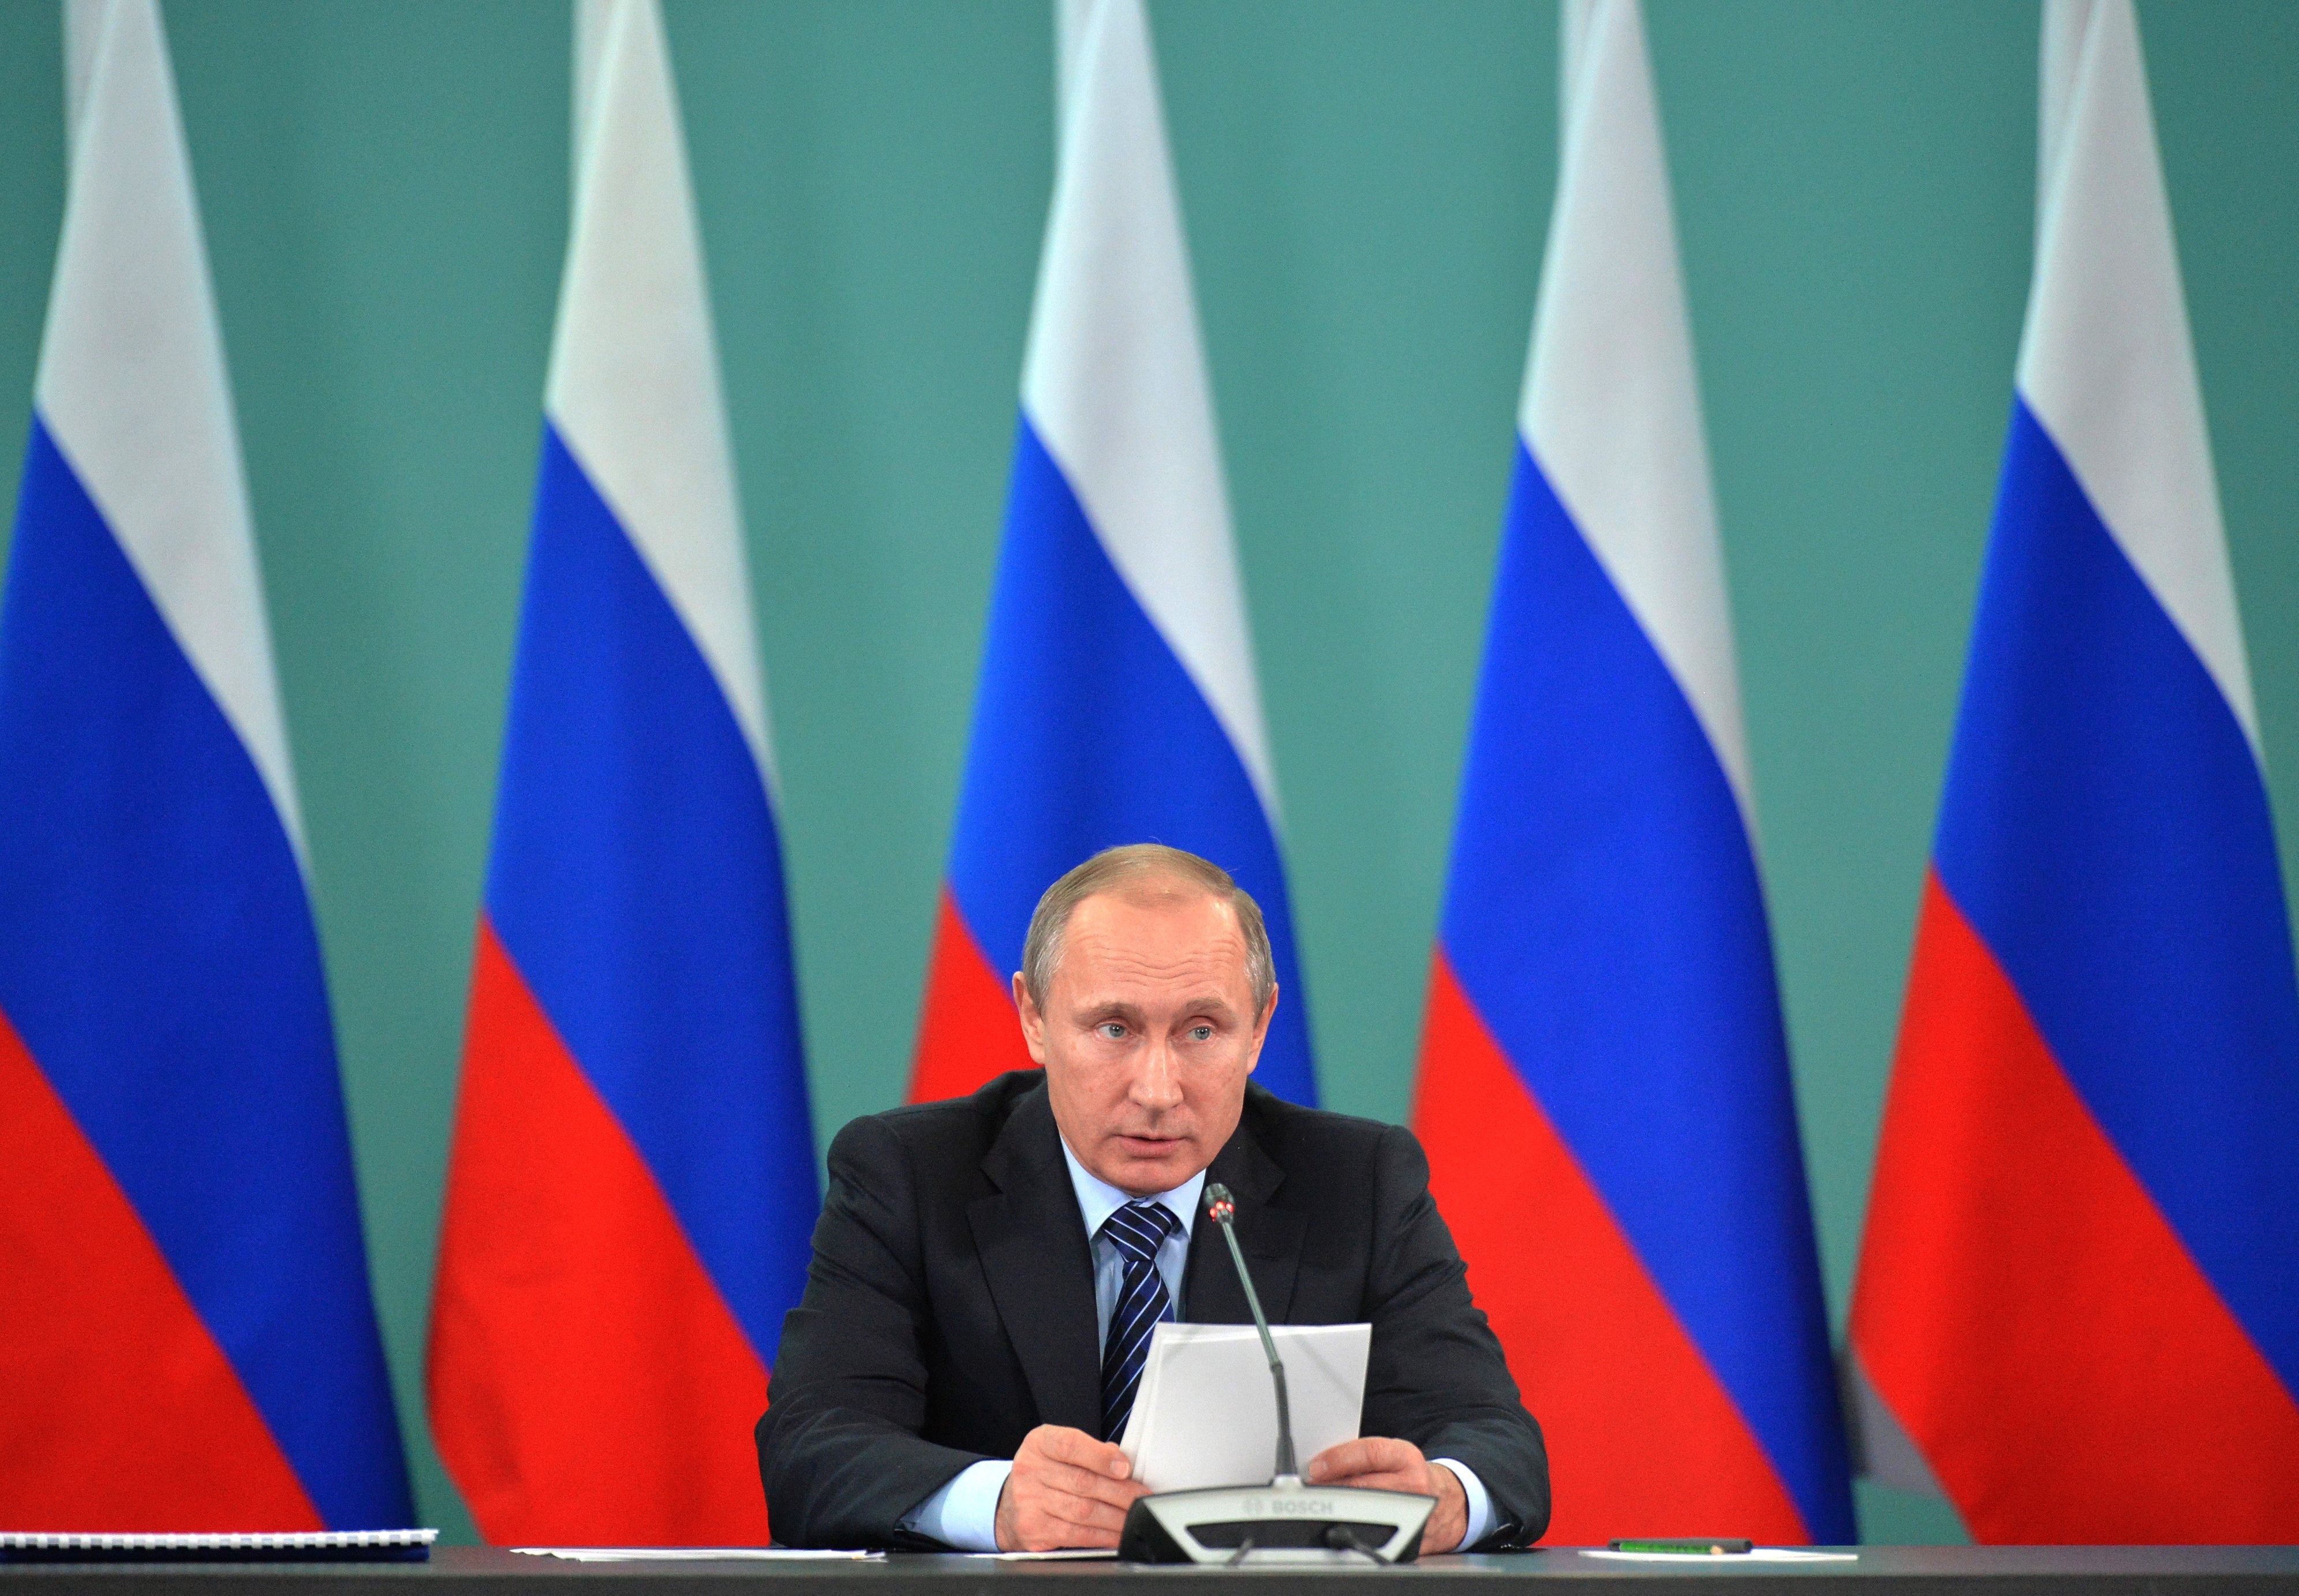 ALTERNATIVE CROP OF XAZ110 - Russian President Vladimir Putin speaks during his late-night meeting with the heads of Russia's sports federations in the Black Sea resort of Sochi, Russia, Wednesday, Nov. 11, 2015. Putin has ordered an investigation into allegations of widespread doping among the country’s sports figures. (Alexei Druzhinin, RIA-Novosti, Kremlin Pool Photo via AP)